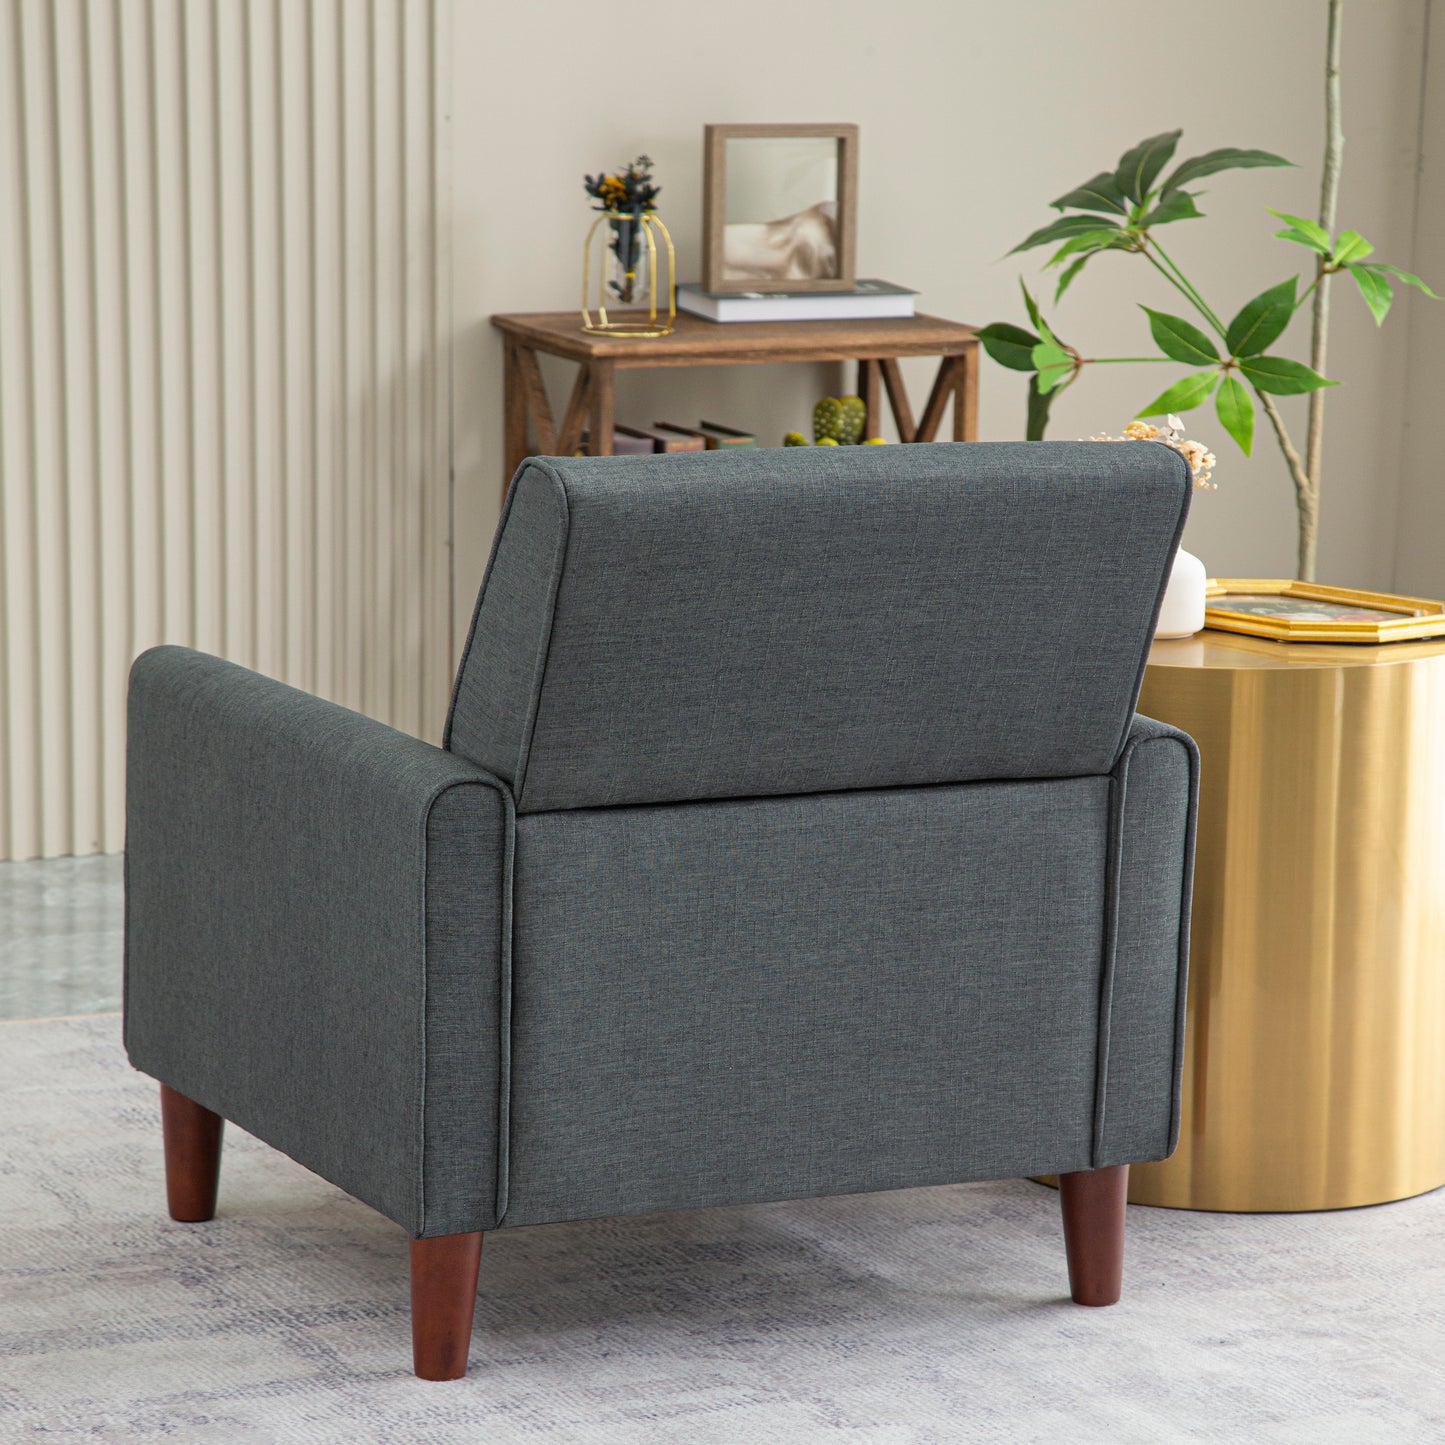 Single sofa chair for bedroom living room with four wooden legs